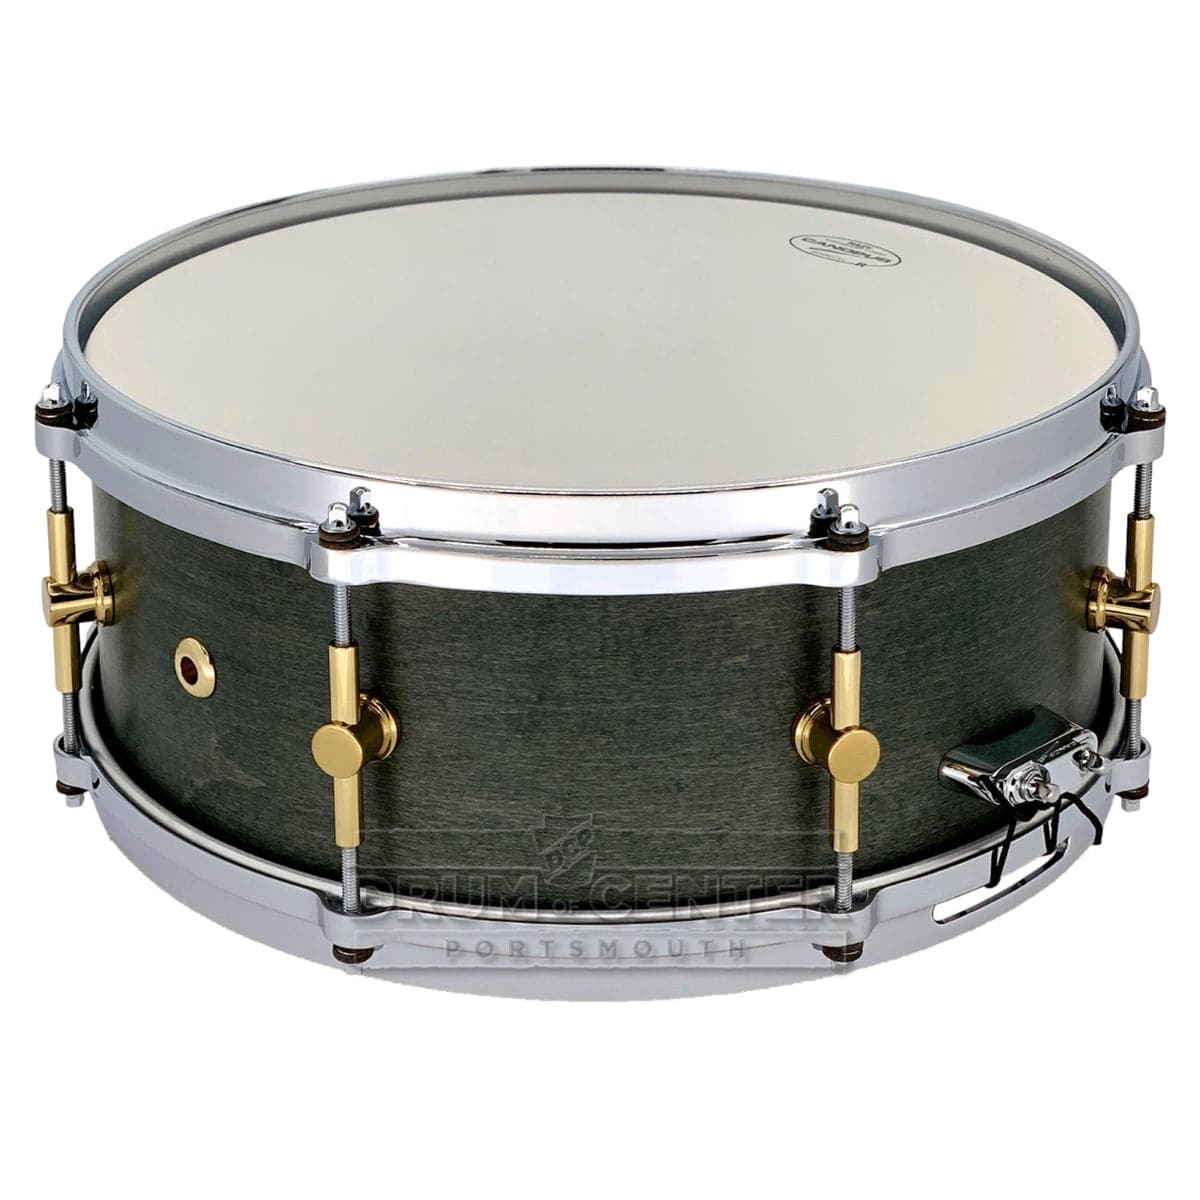 Canopus 'The Maple' 10ply Snare Drum 14x5.5 Black Olive Oil w/Cast Hoops